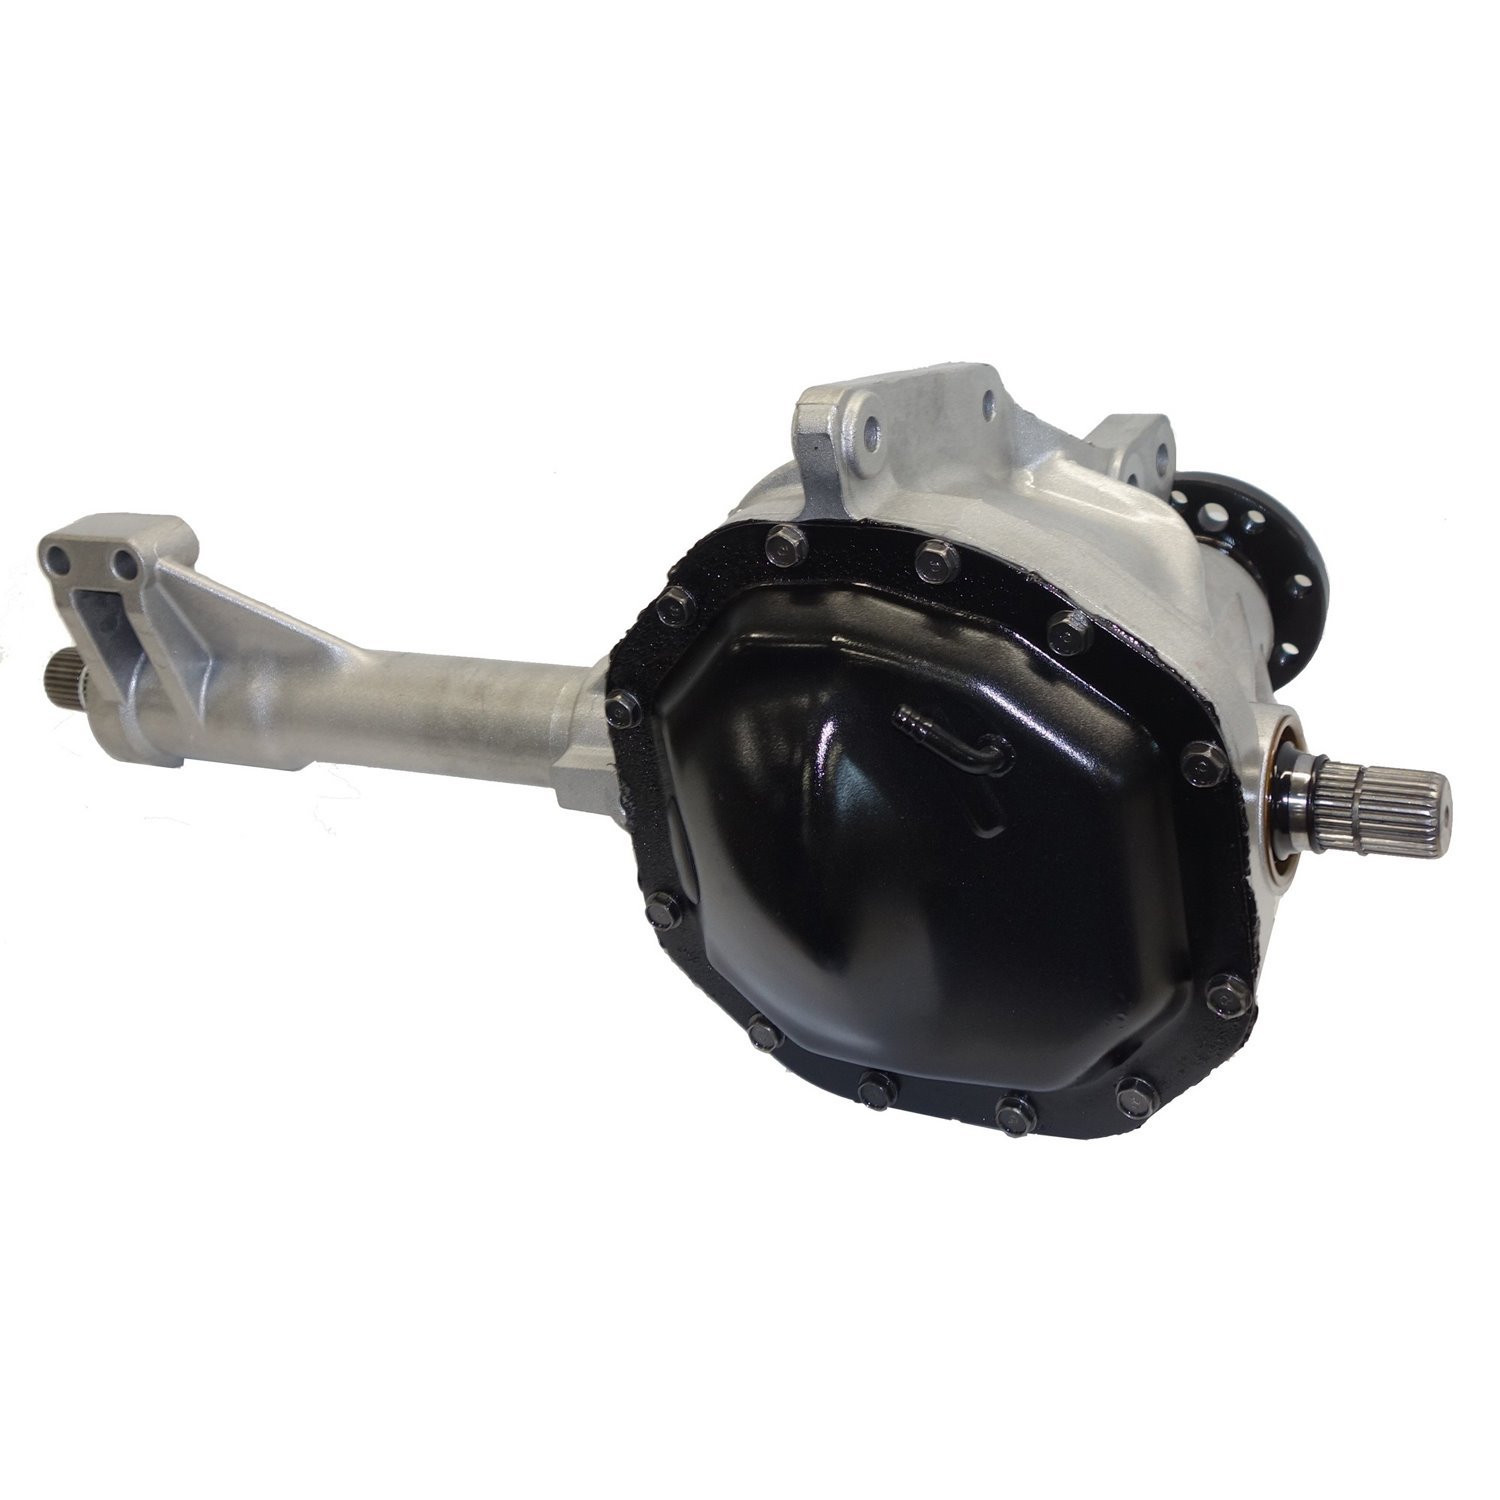 Remanufactured Axle Assembly for 8.0" IFS 02-05 Dodge Ram 1500 3.55 Ratio